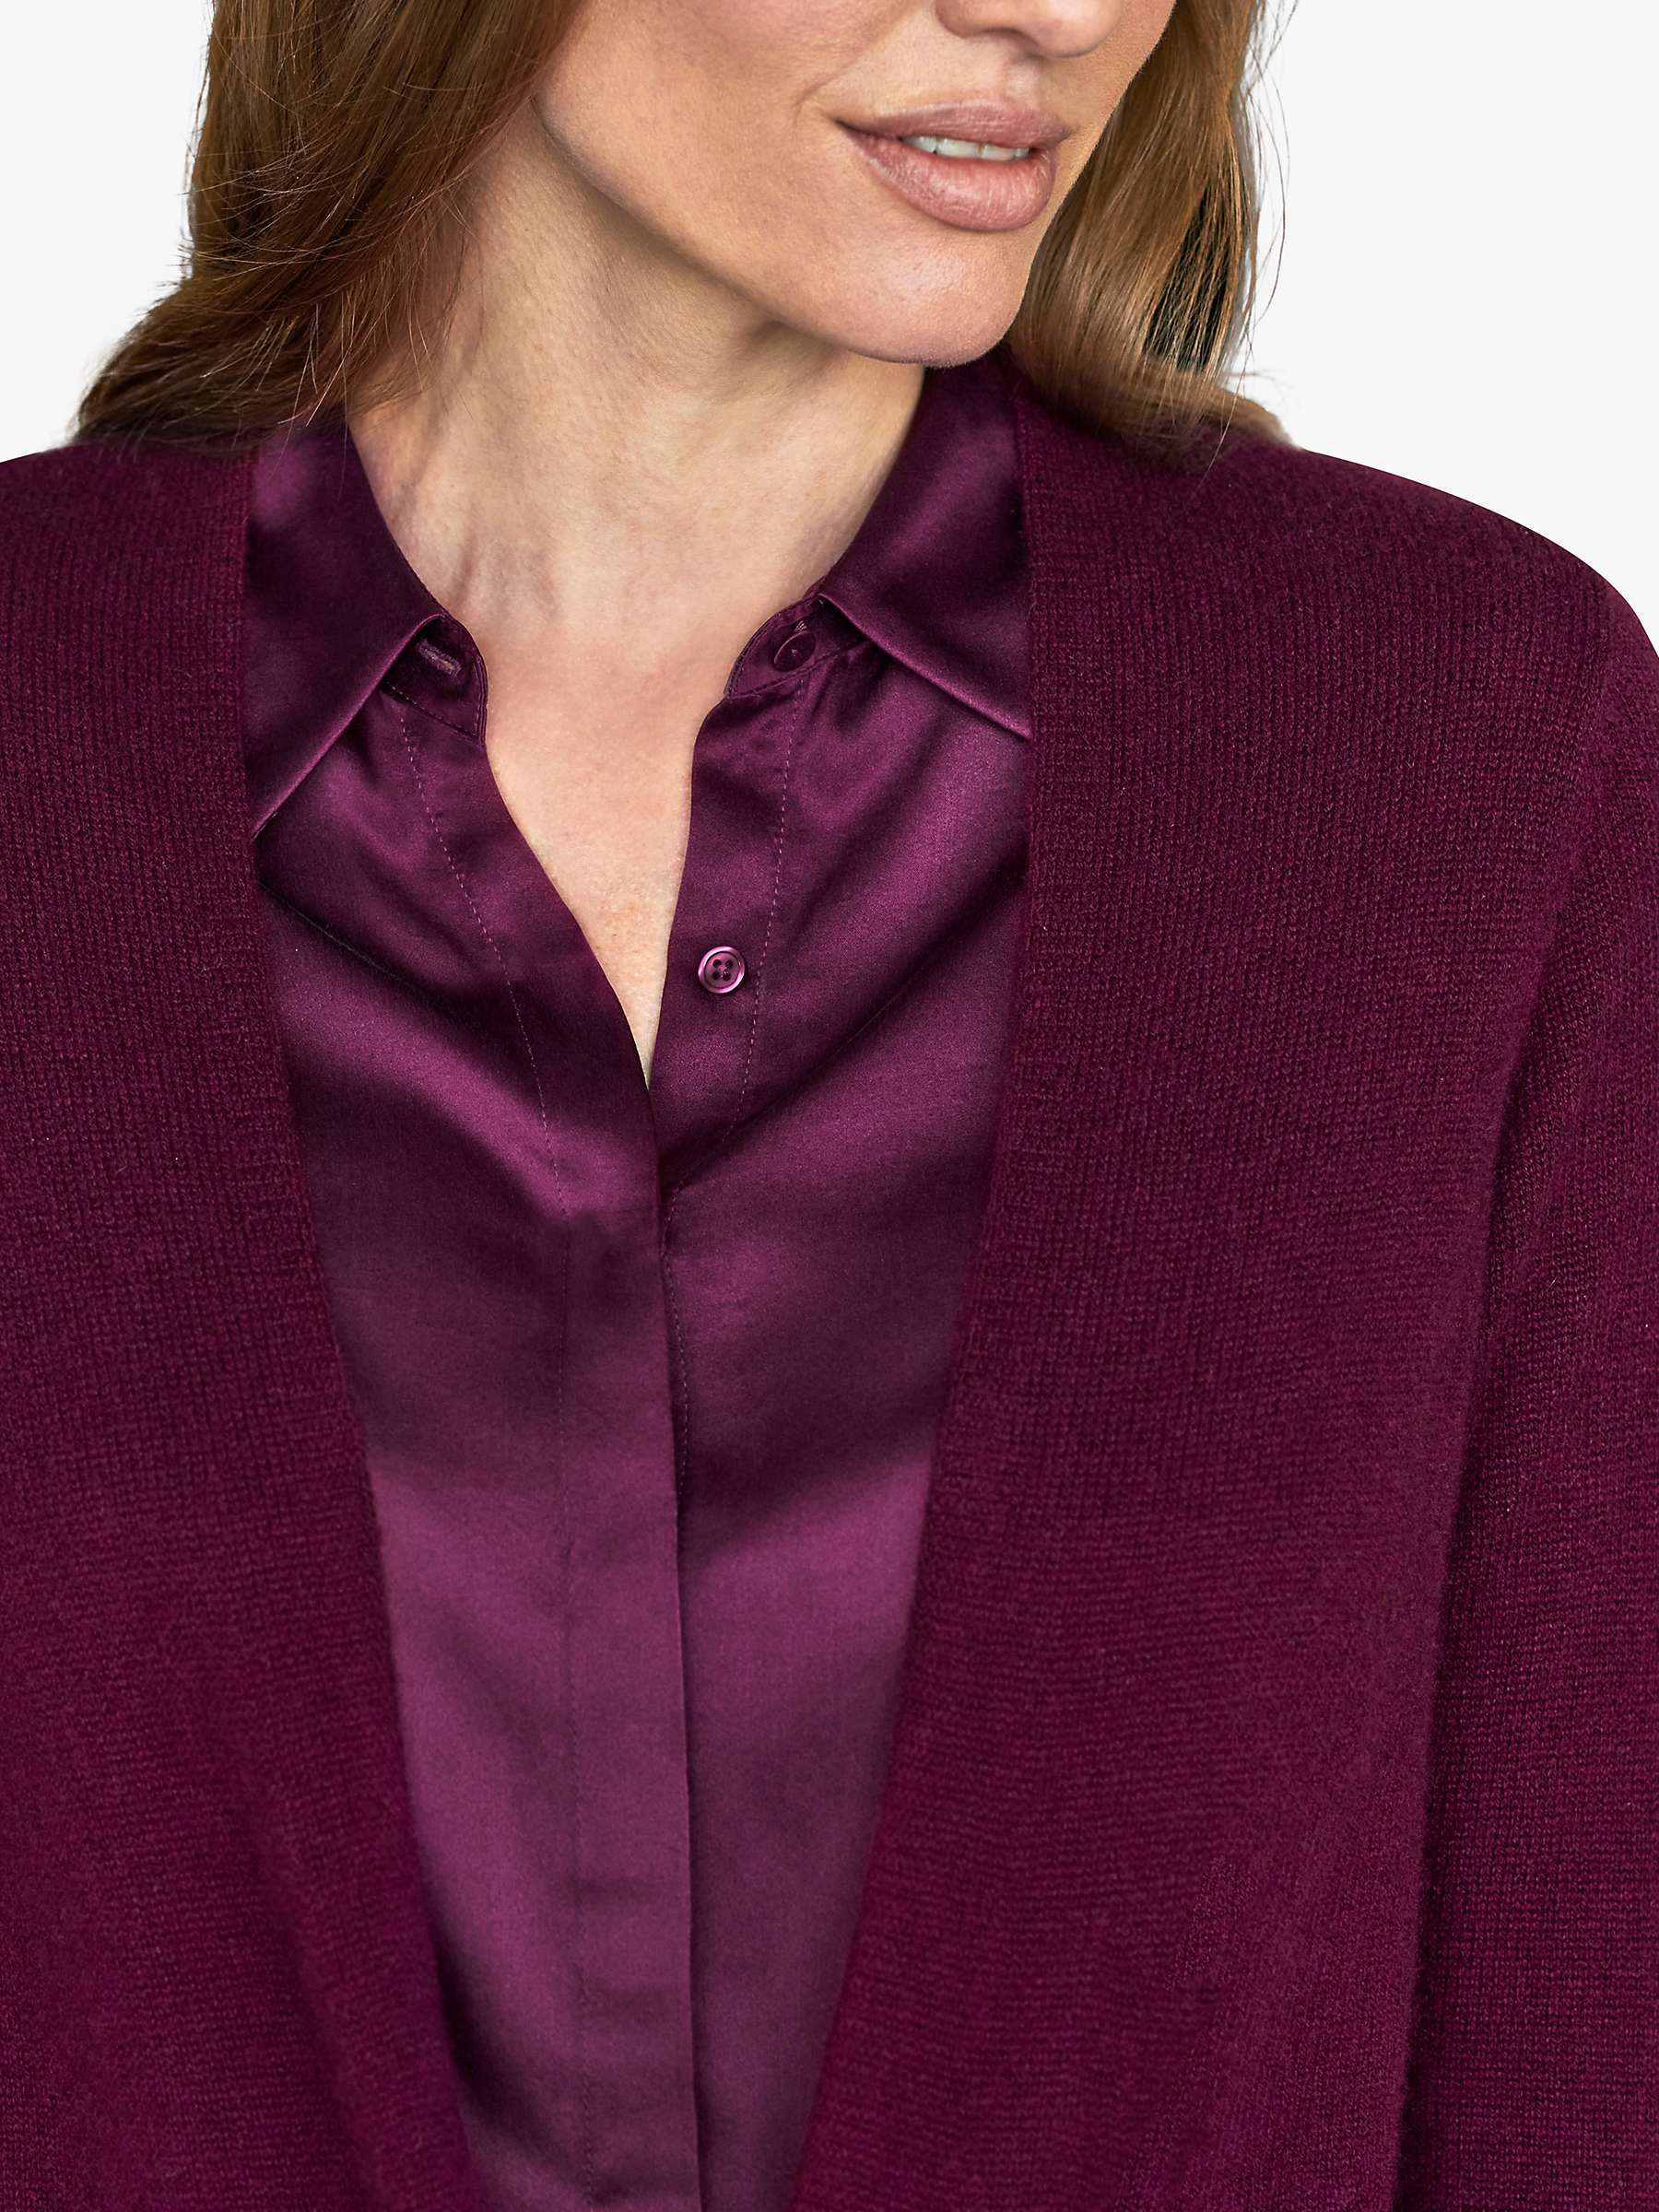 Buy Pure Collection Gassato Cashmere Swing Cardigan Online at johnlewis.com